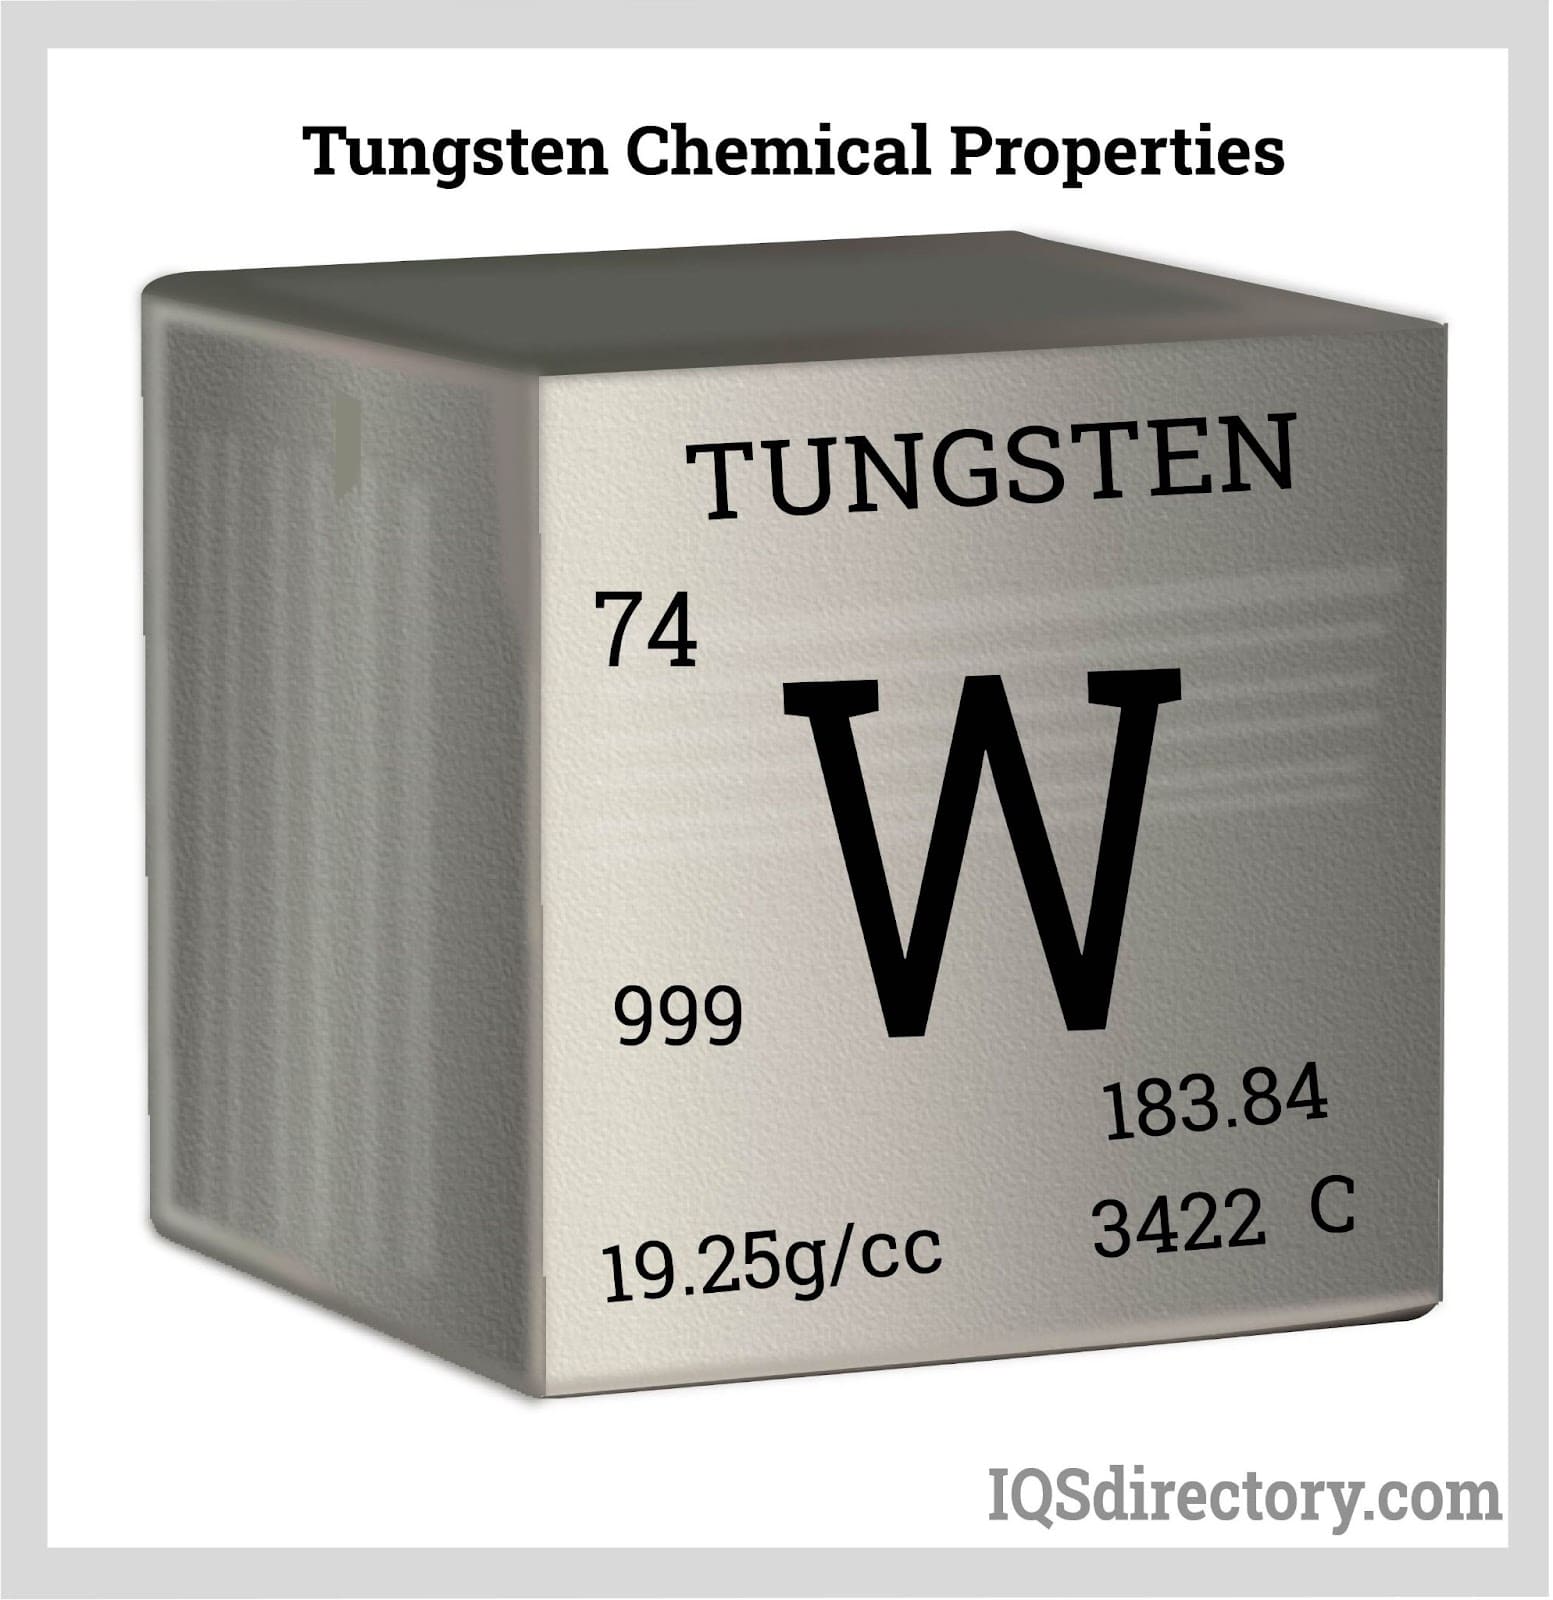 tungsten chemical properties